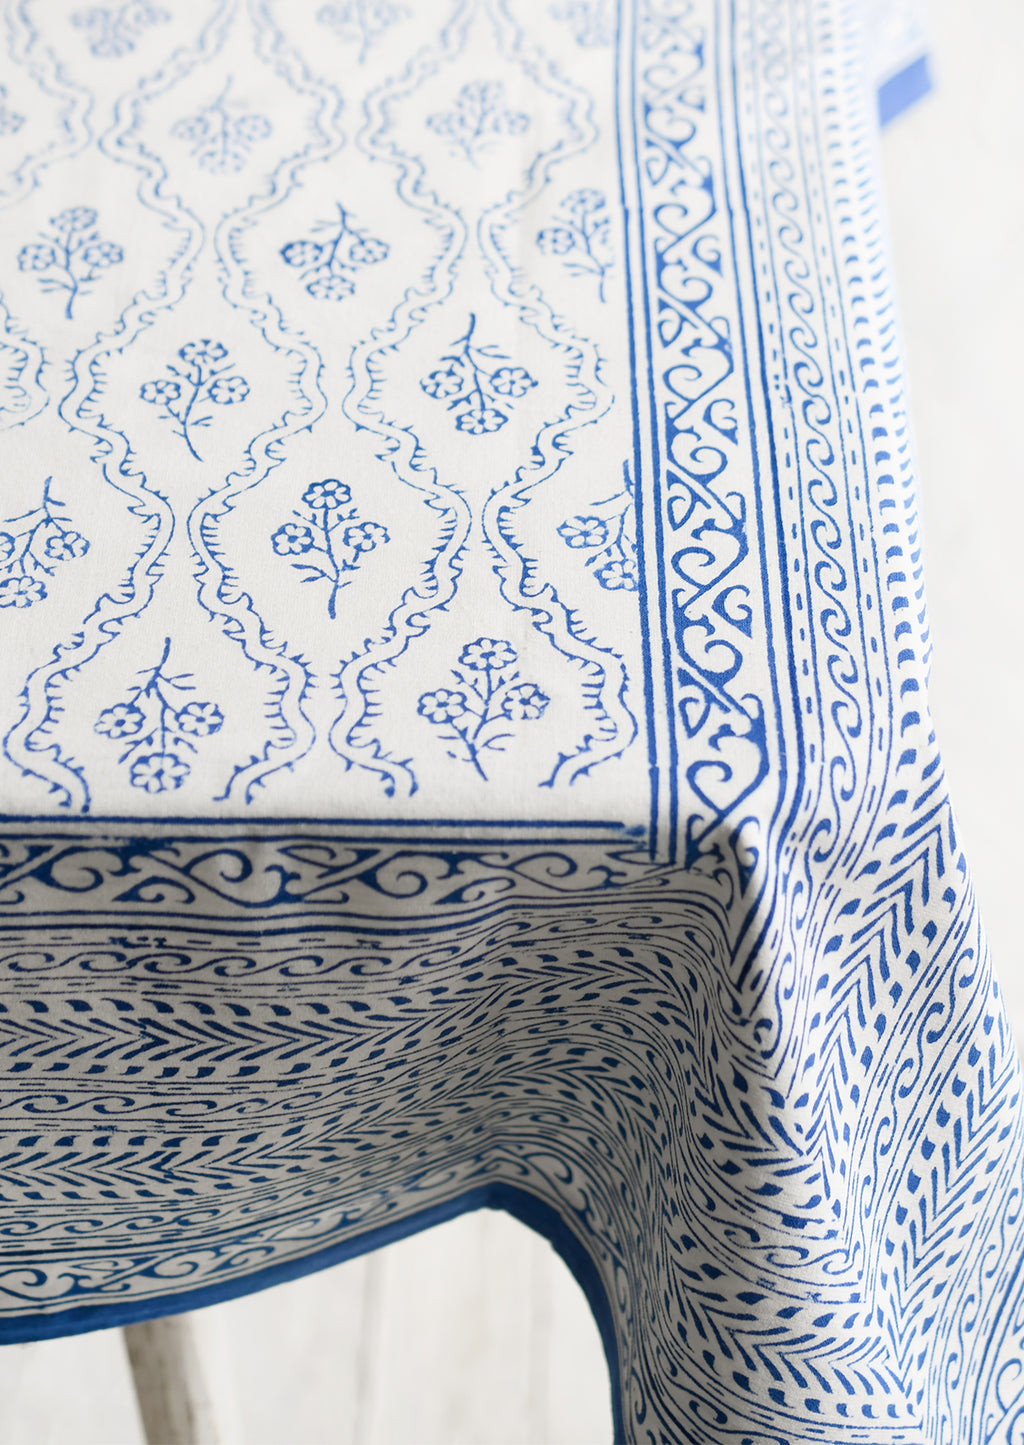 3: A blue and white block printed, floral print tablecloth.